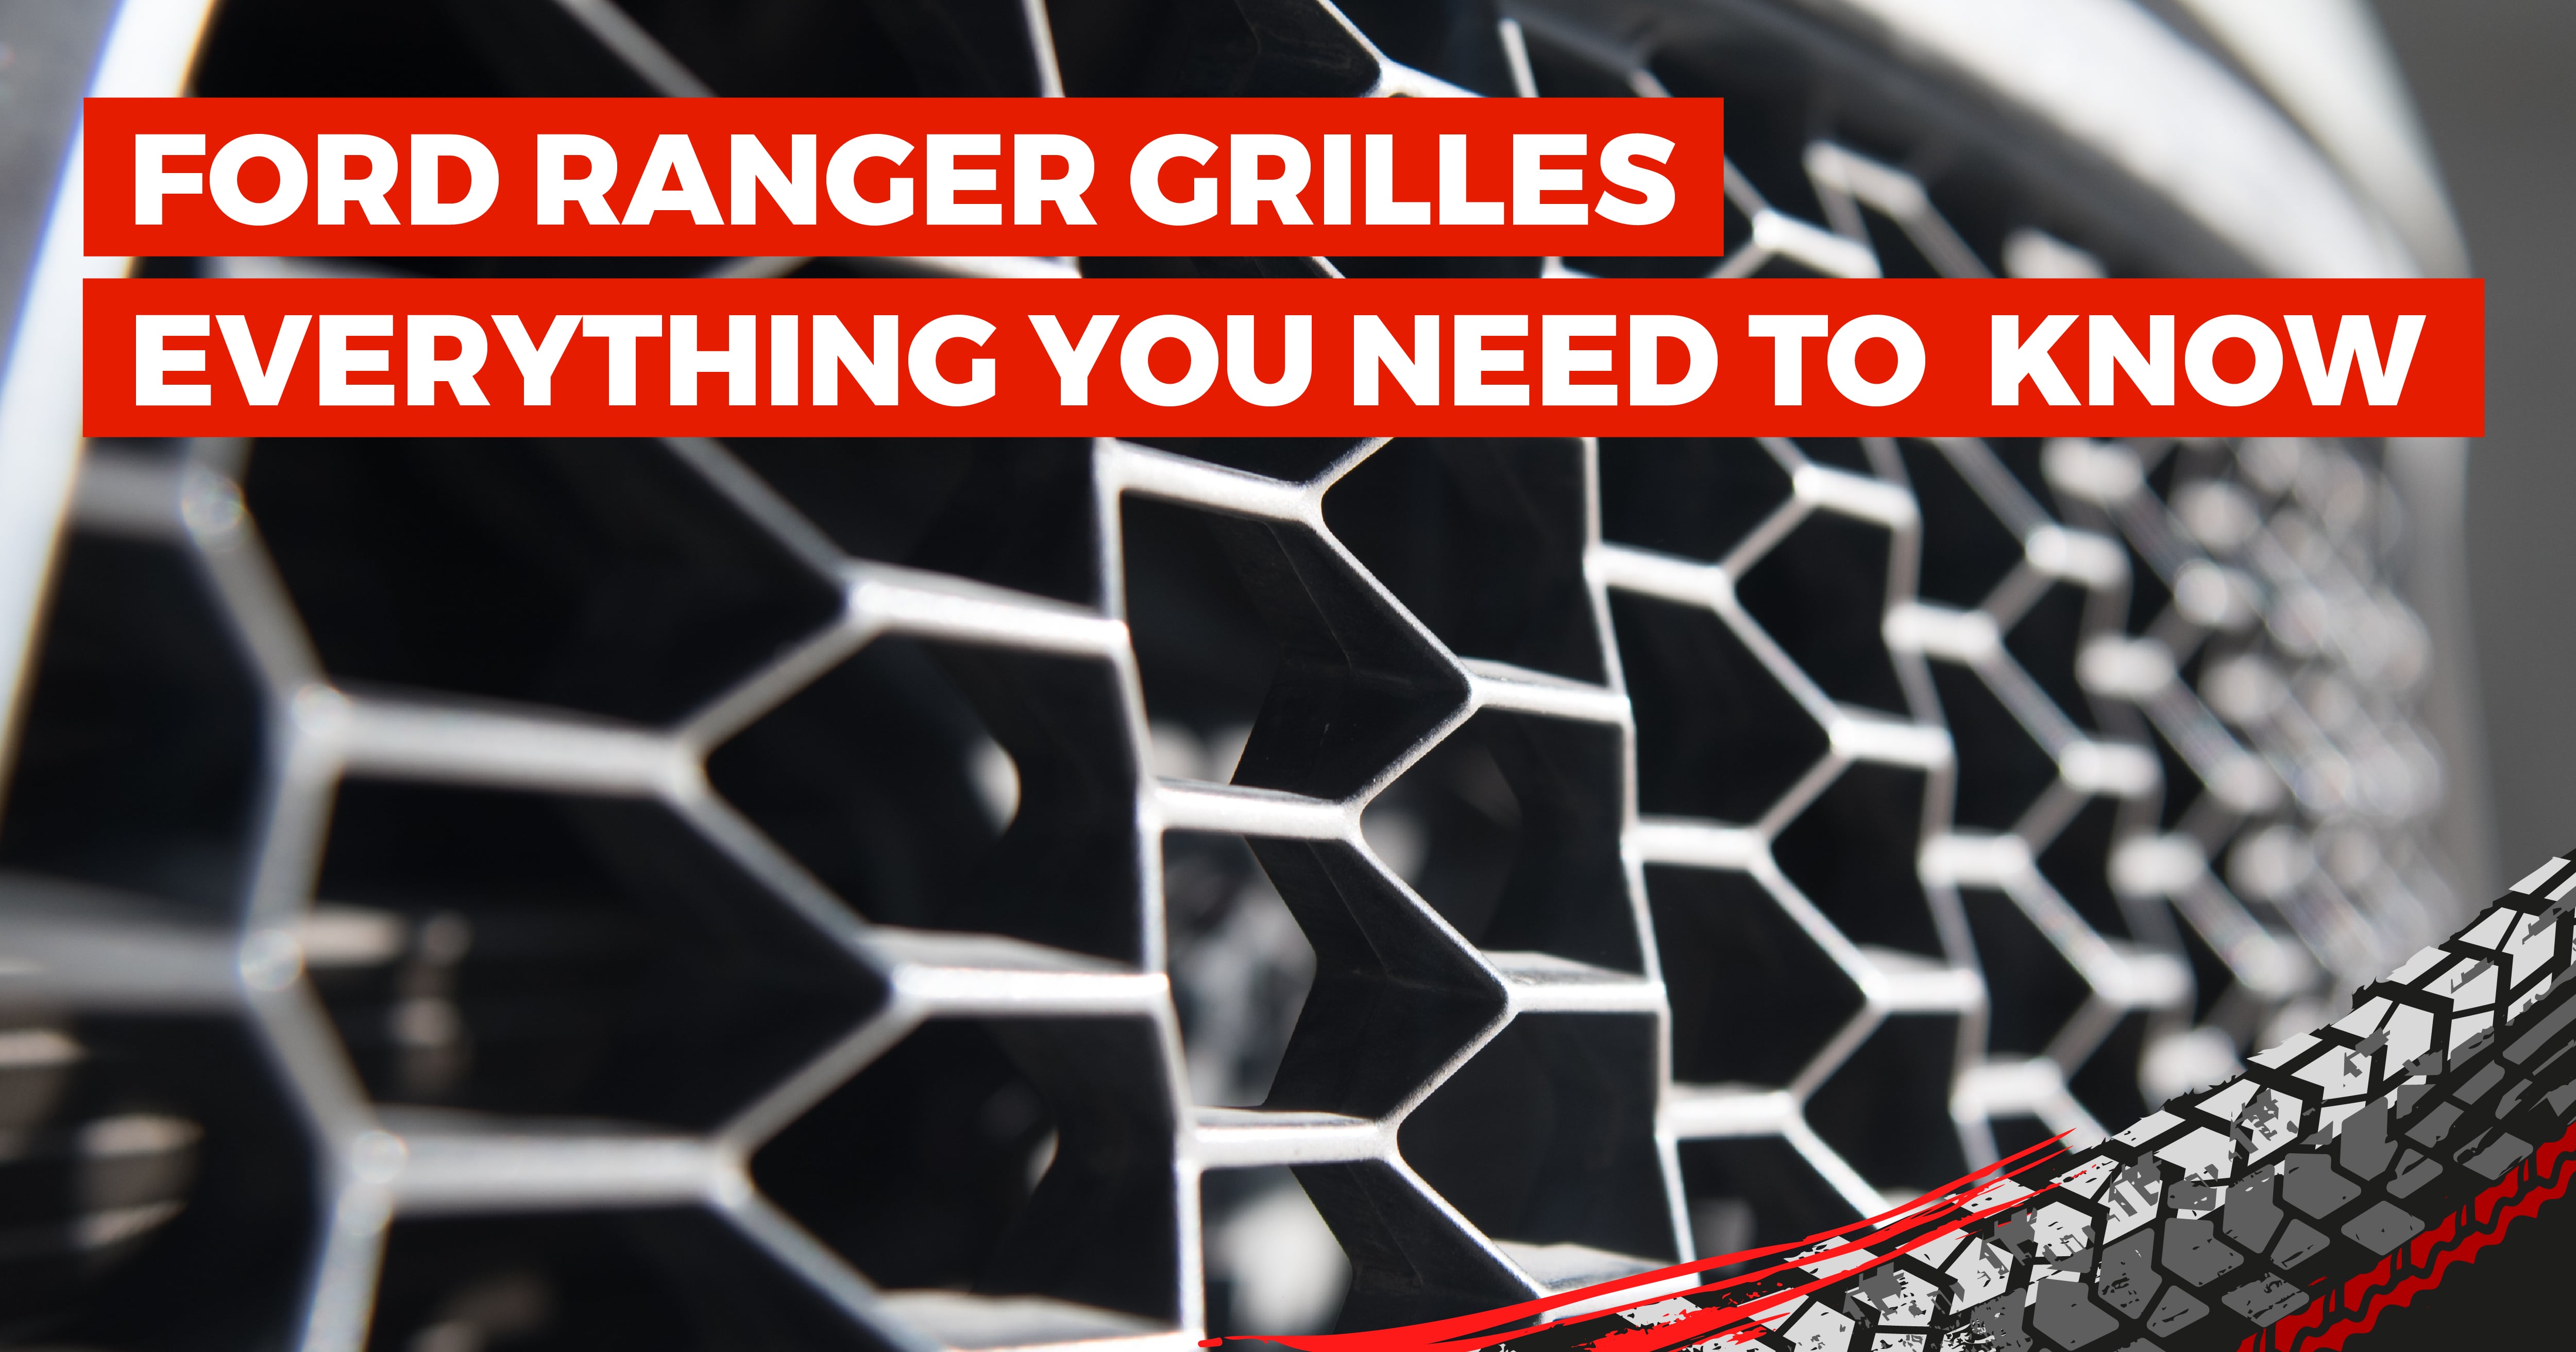 Ford Ranger Grilles: Everything You Need To Know